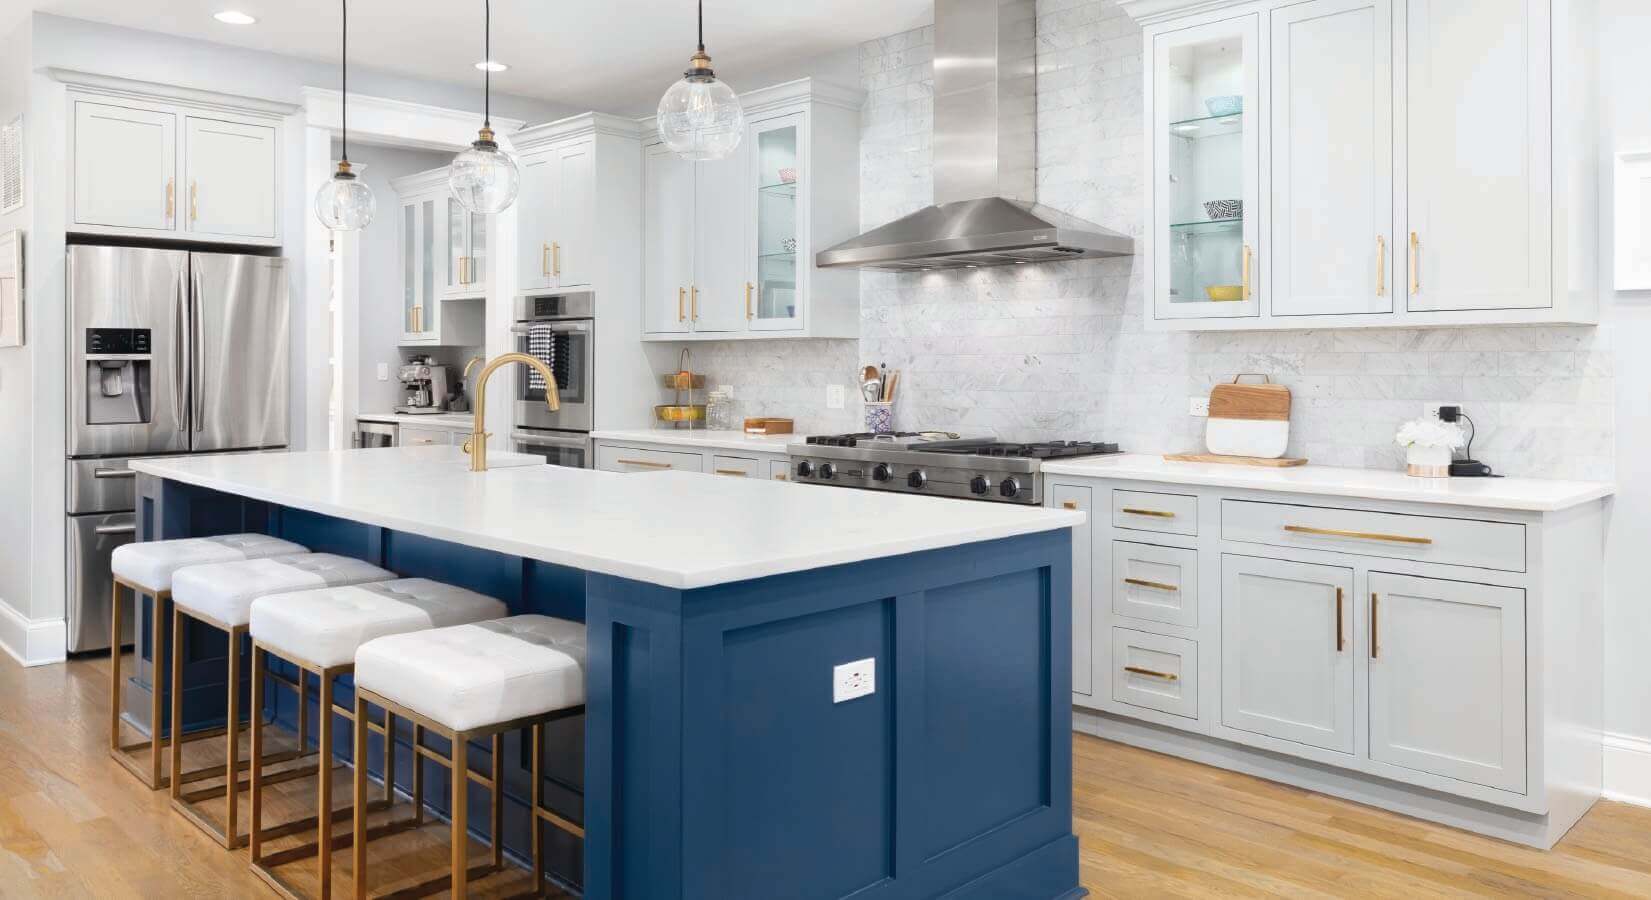 Navy Blue Kitchen Cabinets with Brass Hardware - Transitional